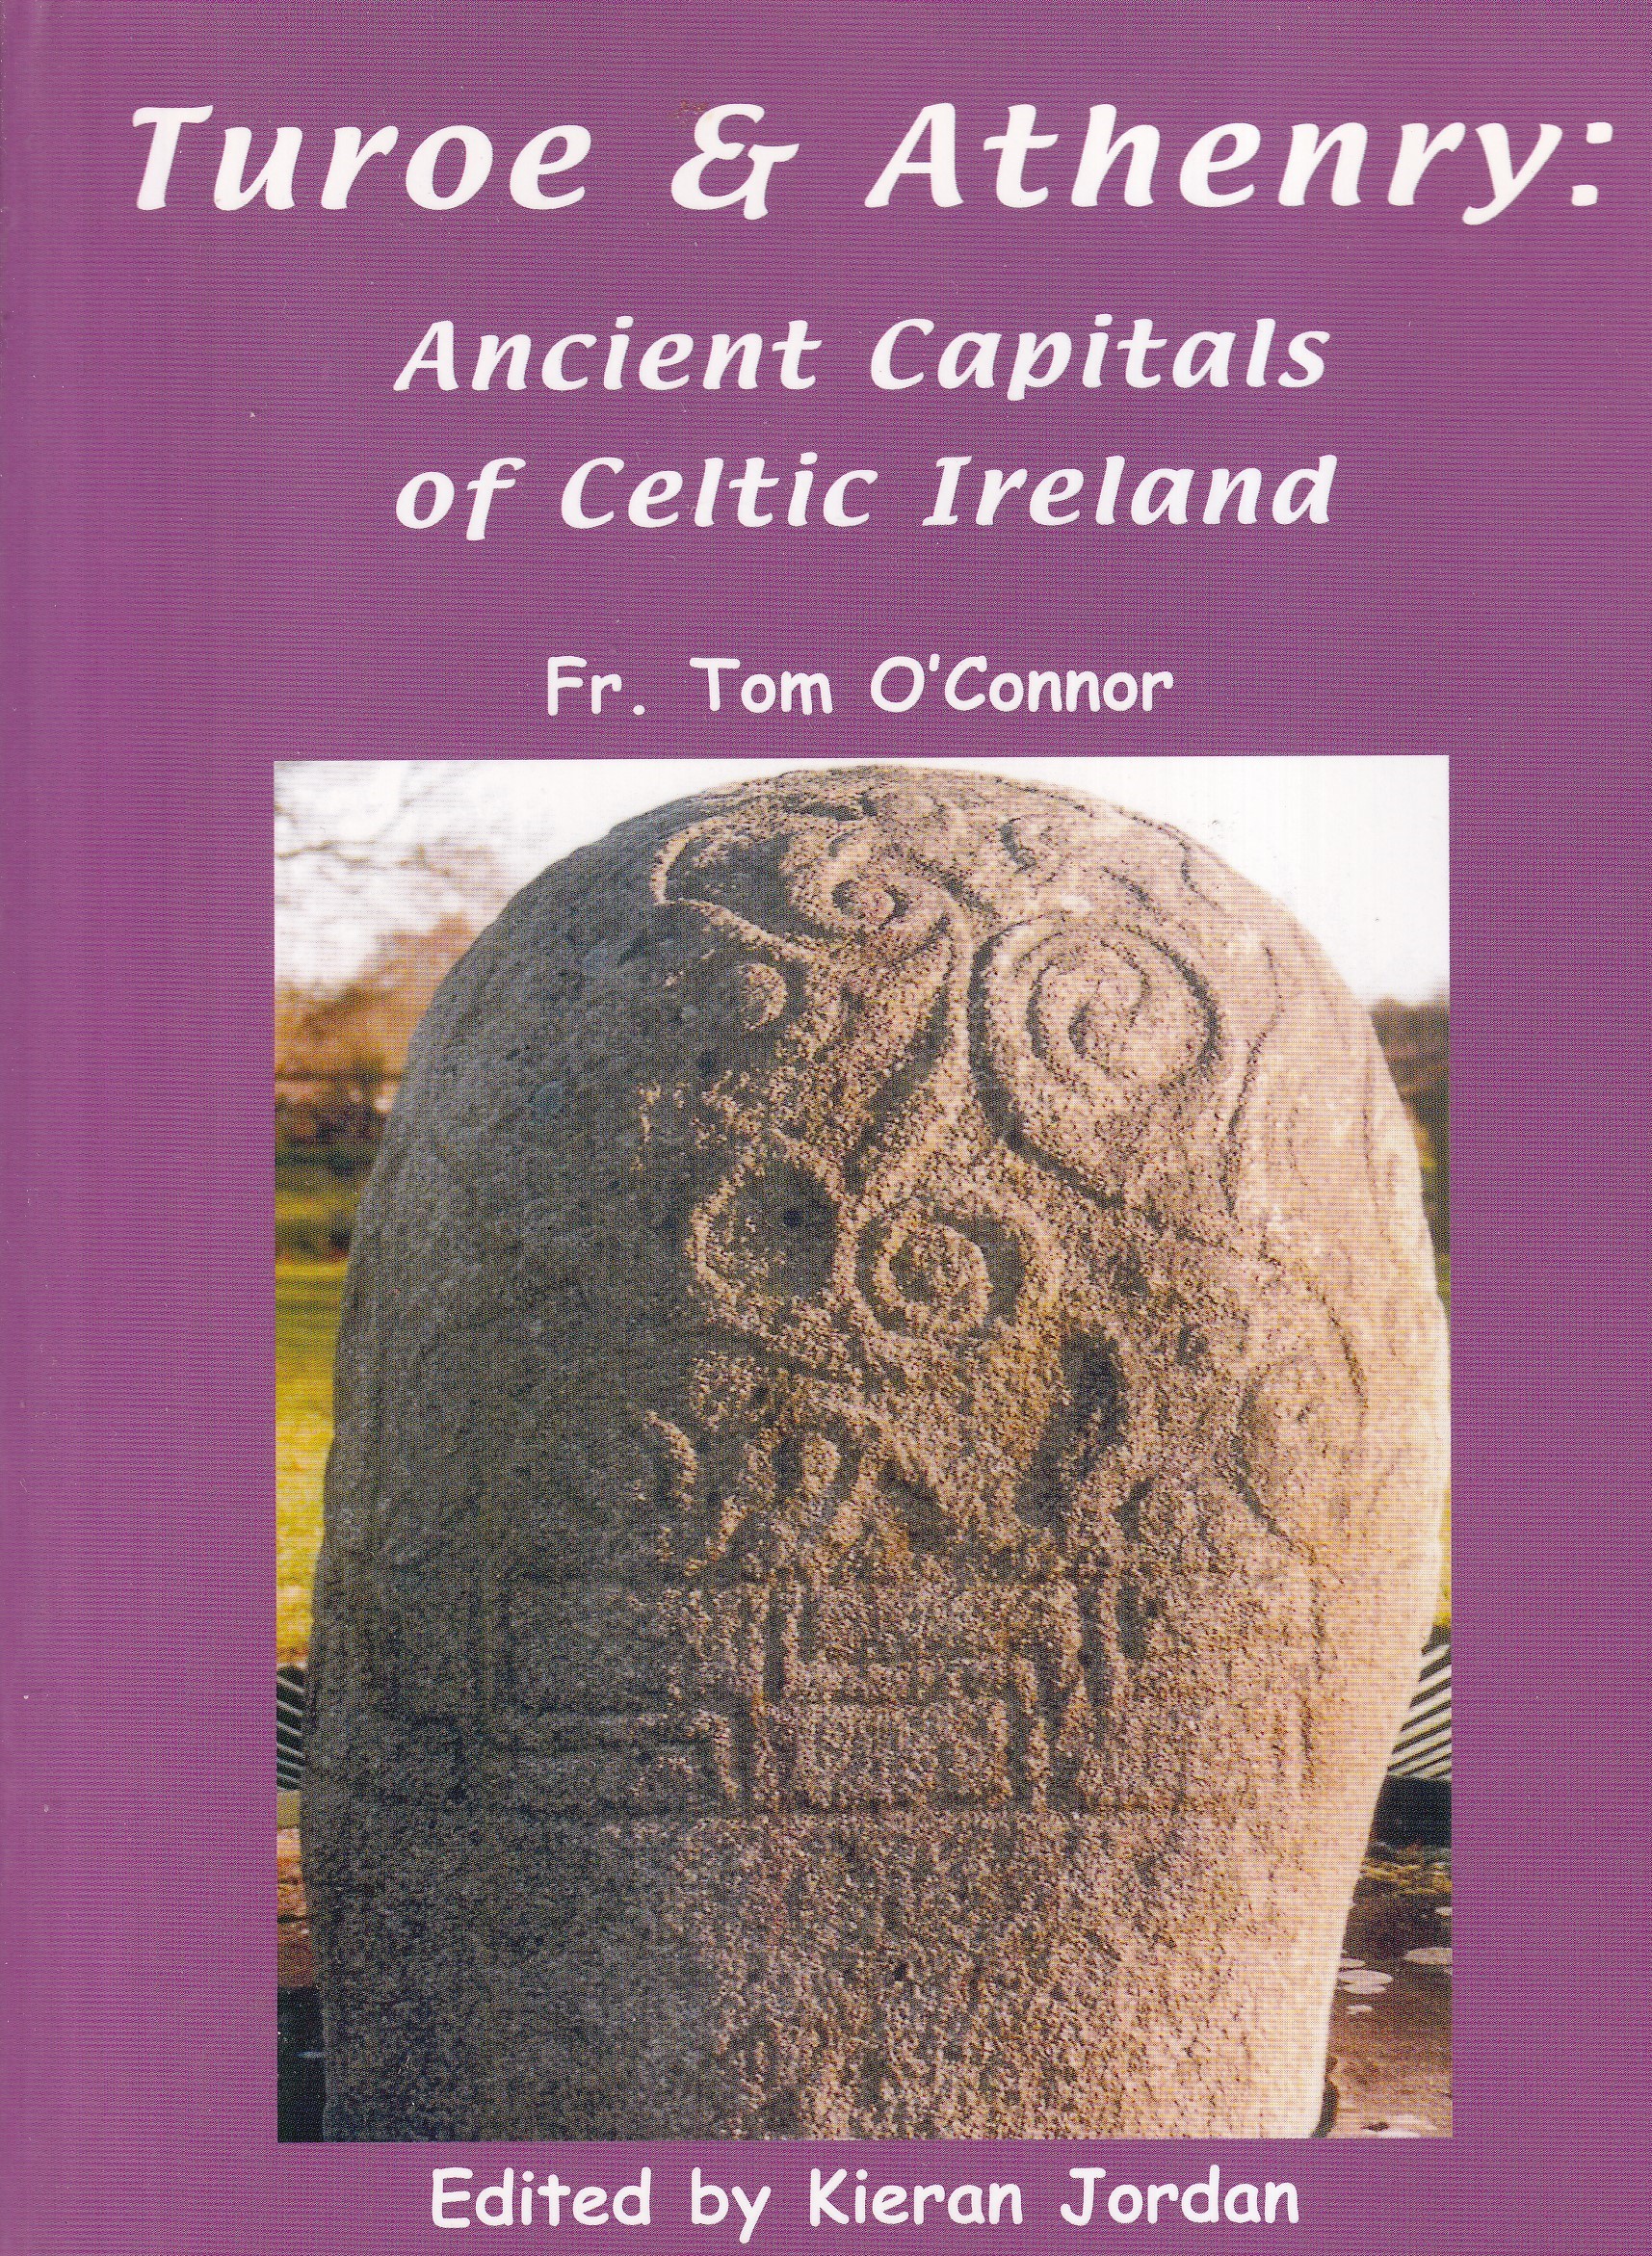 Turoe and Athenry: Ancient Capitals of Celtic Ireland | Fr. Tom O'Connor | Charlie Byrne's